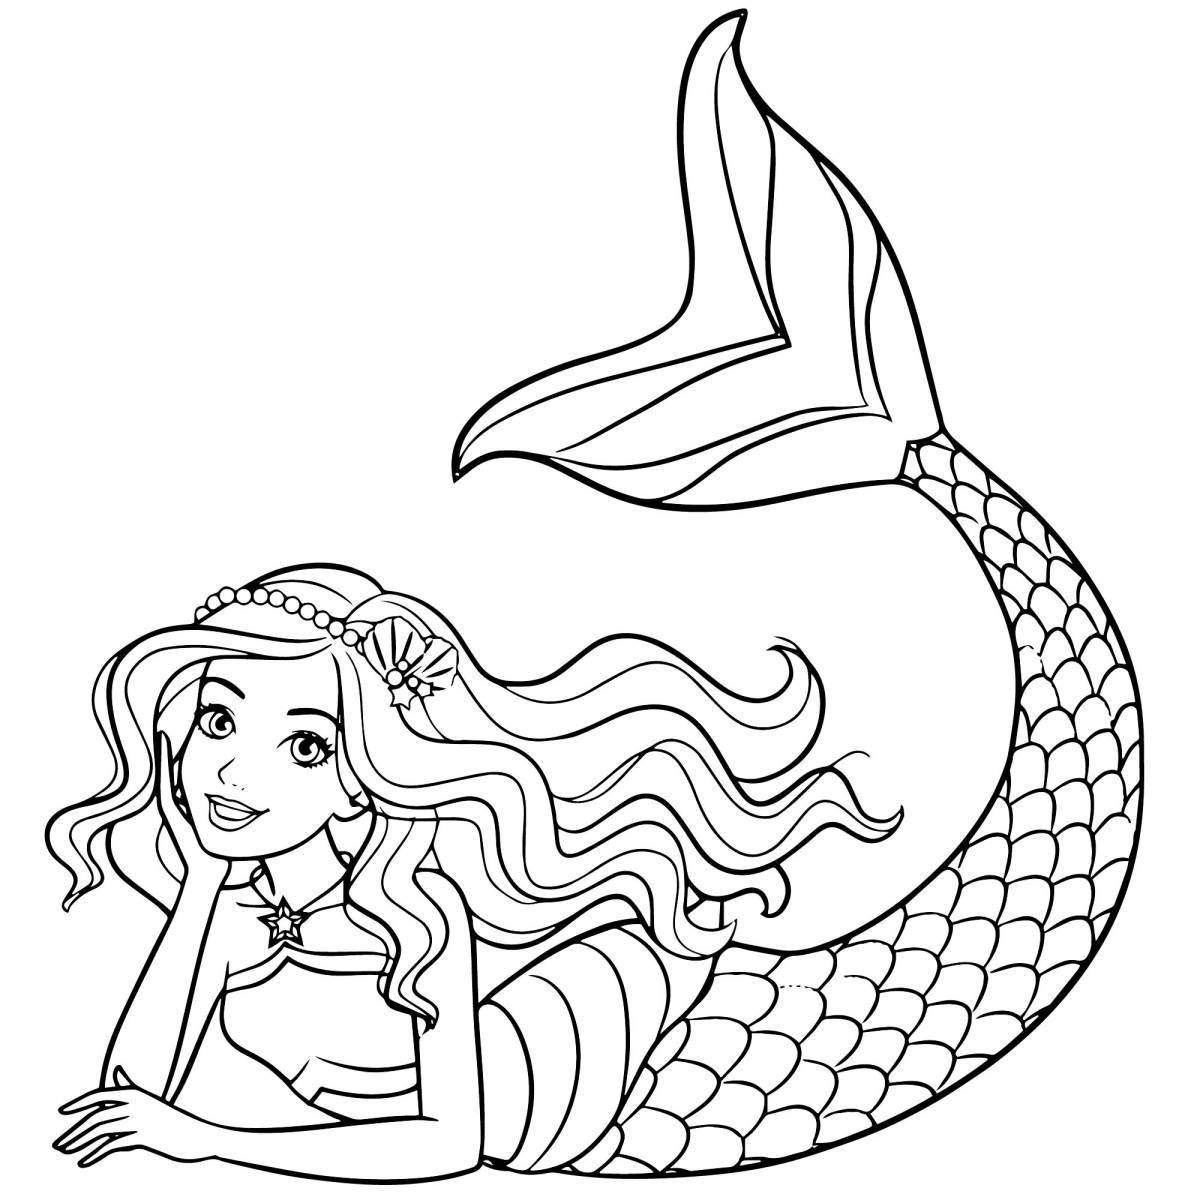 Animated mermaid coloring book for children 4-5 years old